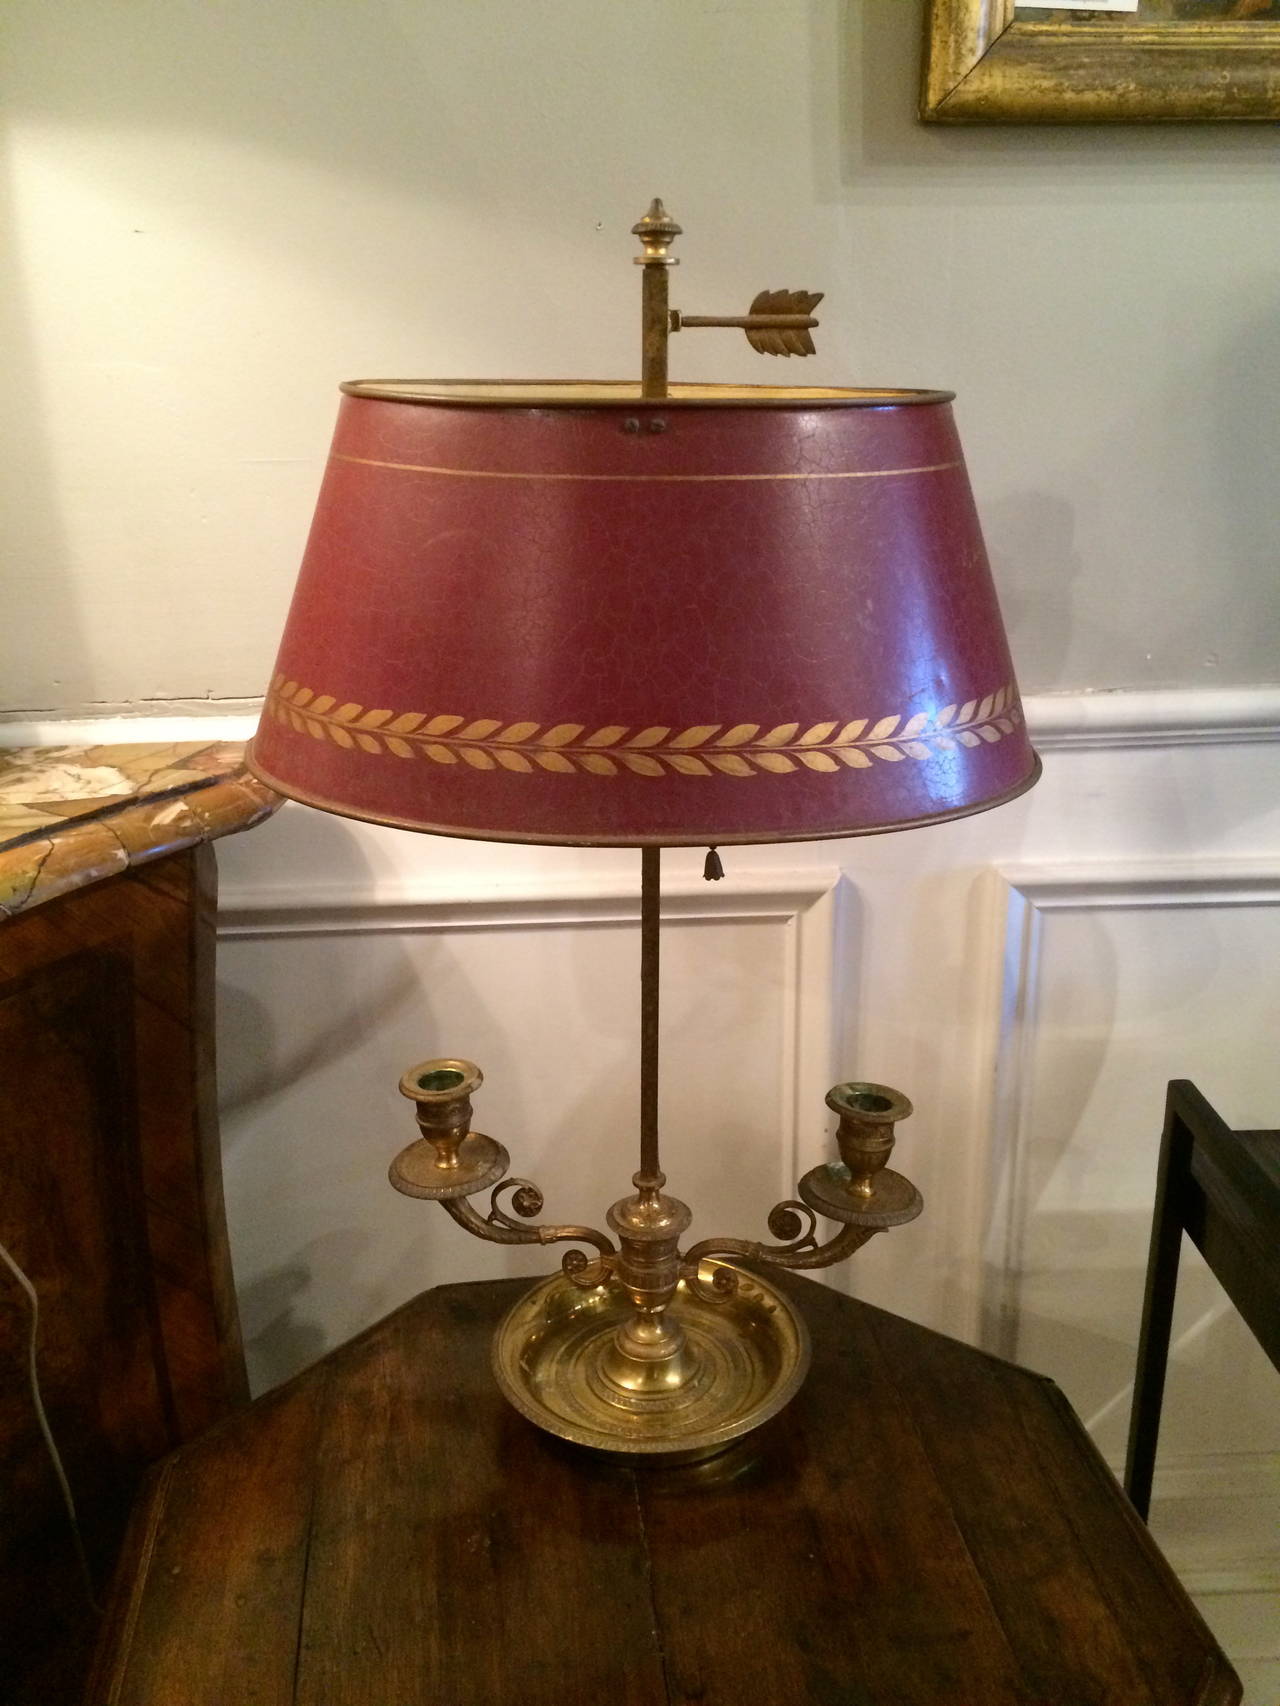 French gilt bronze Charles X bouillotte lamp with original red tole and gilt shade above two candleholders. Now electrified.

Bouillotte is an 18th century French gambling card game of the revolution very popular during the 19th century in France